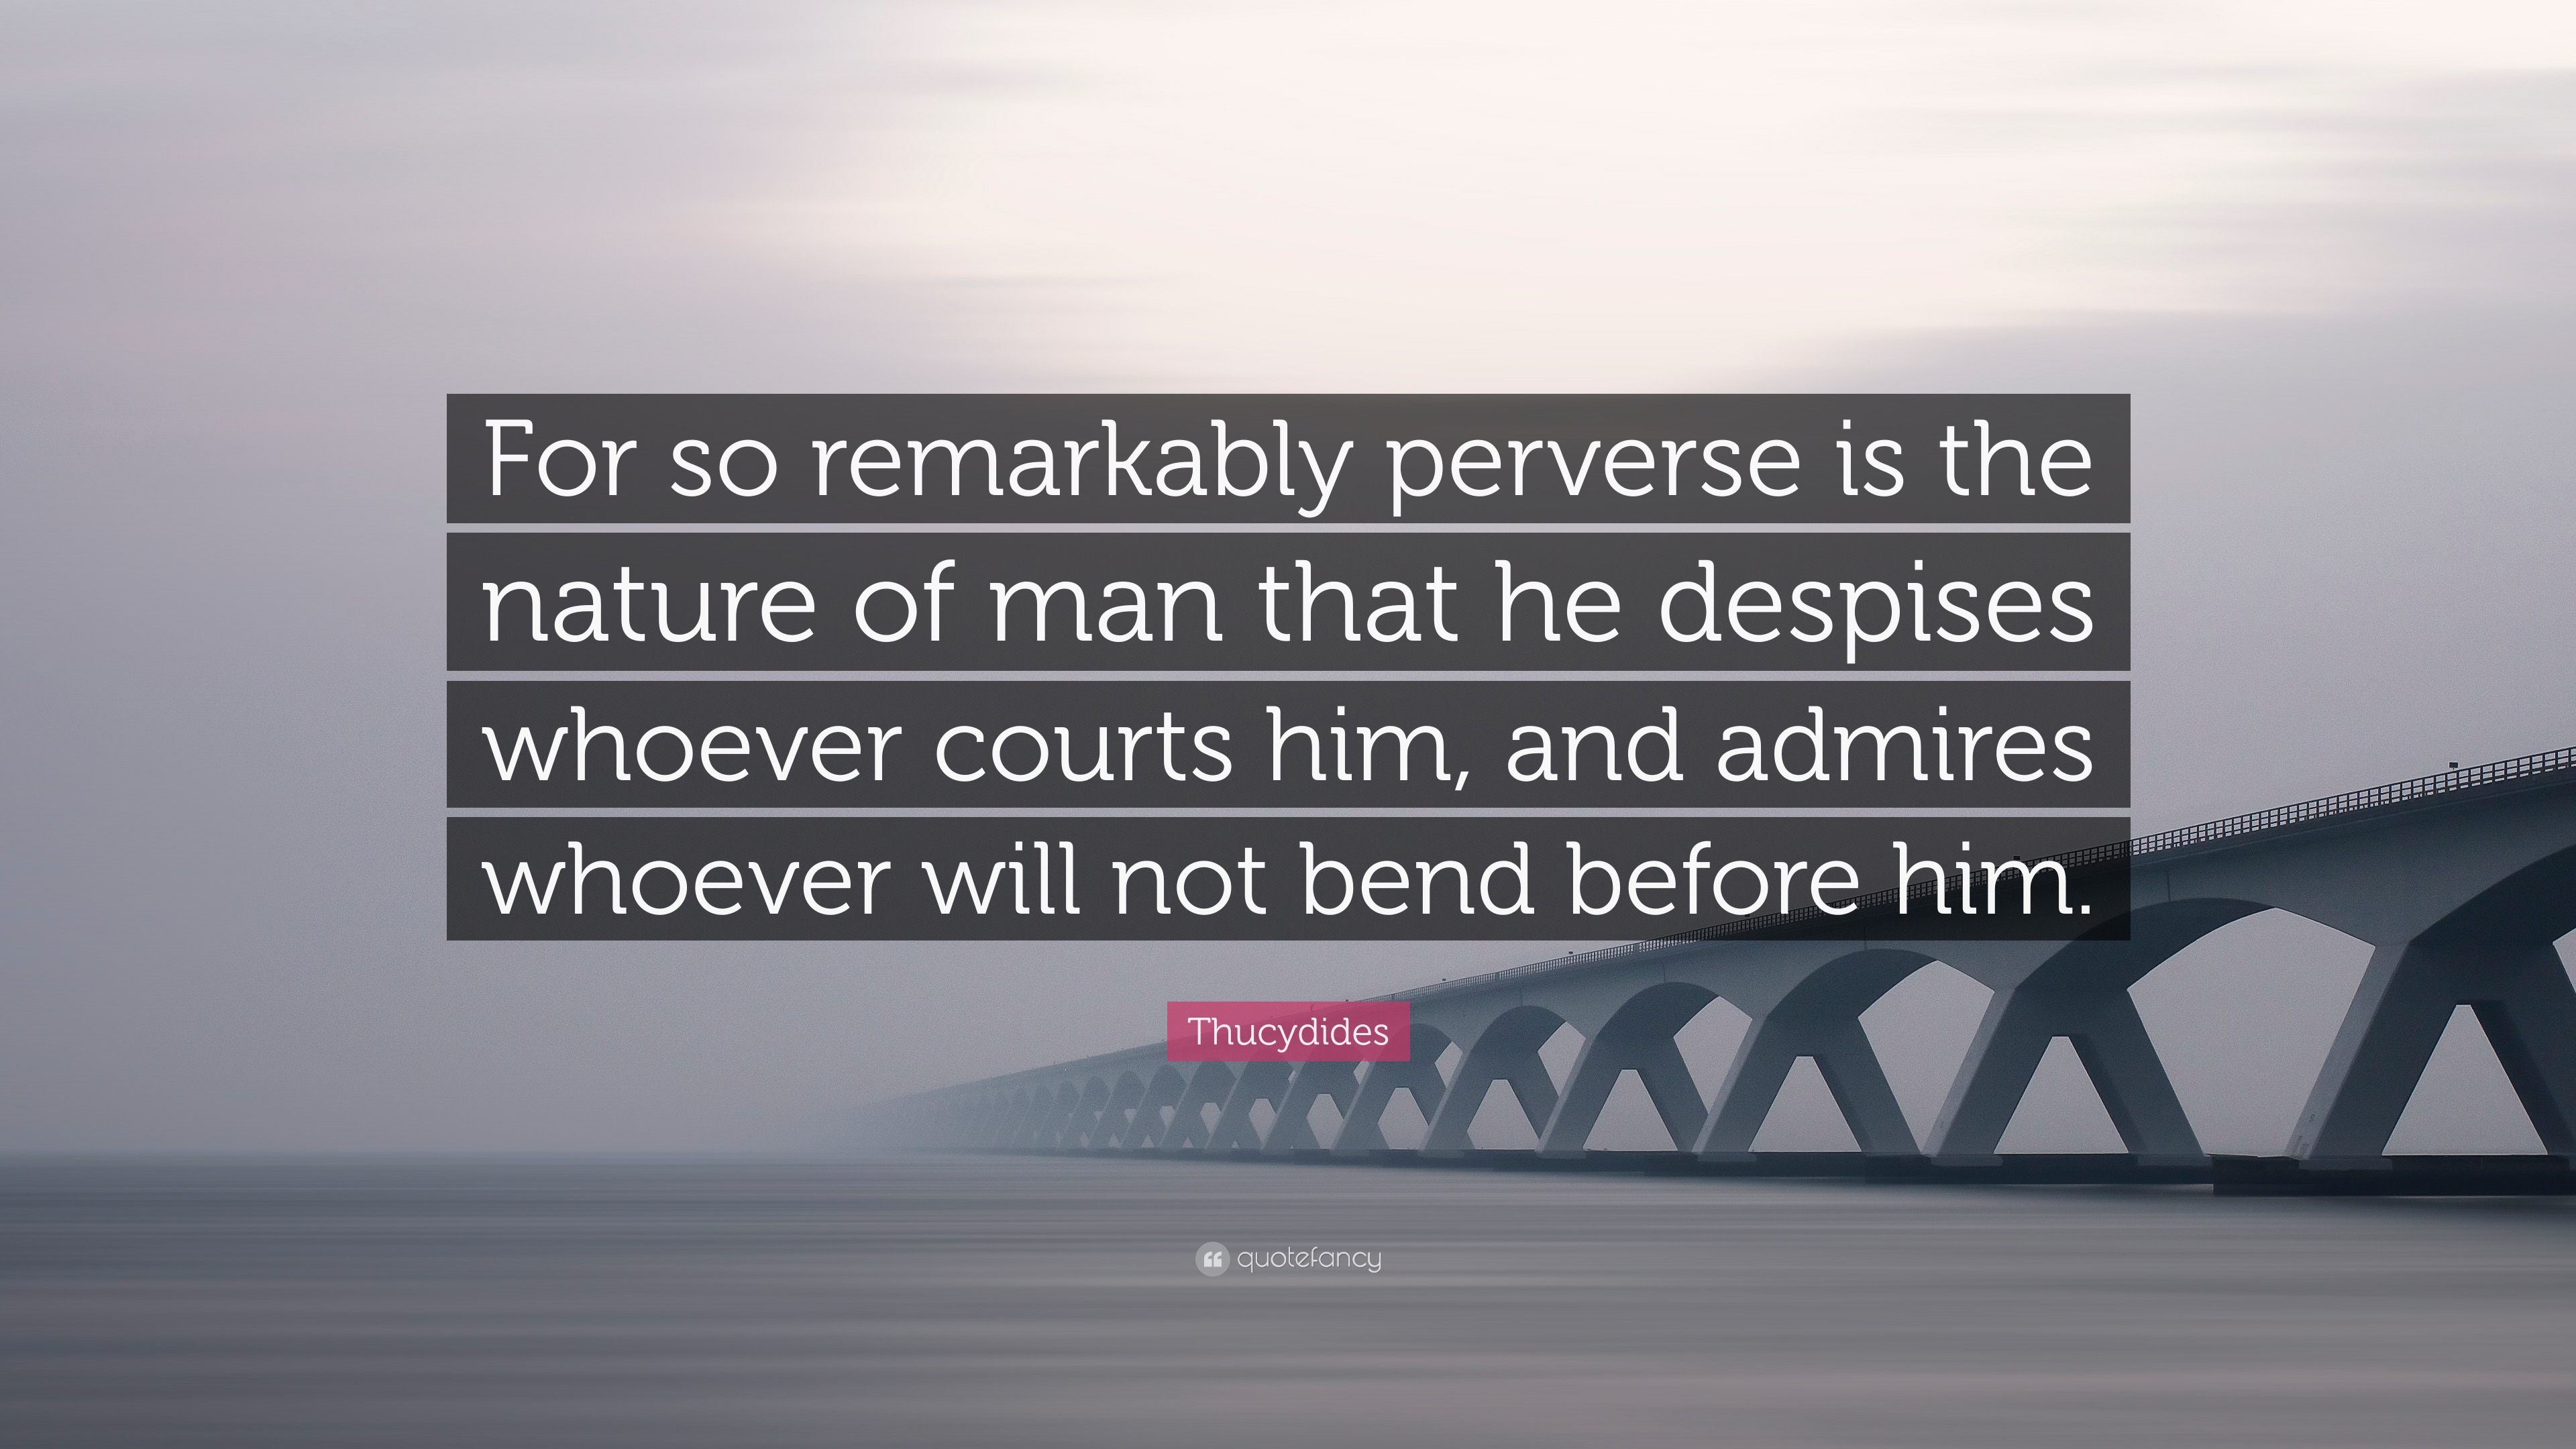 Thucydides Quote: “For so remarkably perverse is the of man that despises whoever courts and admires whoever will not bend b...”